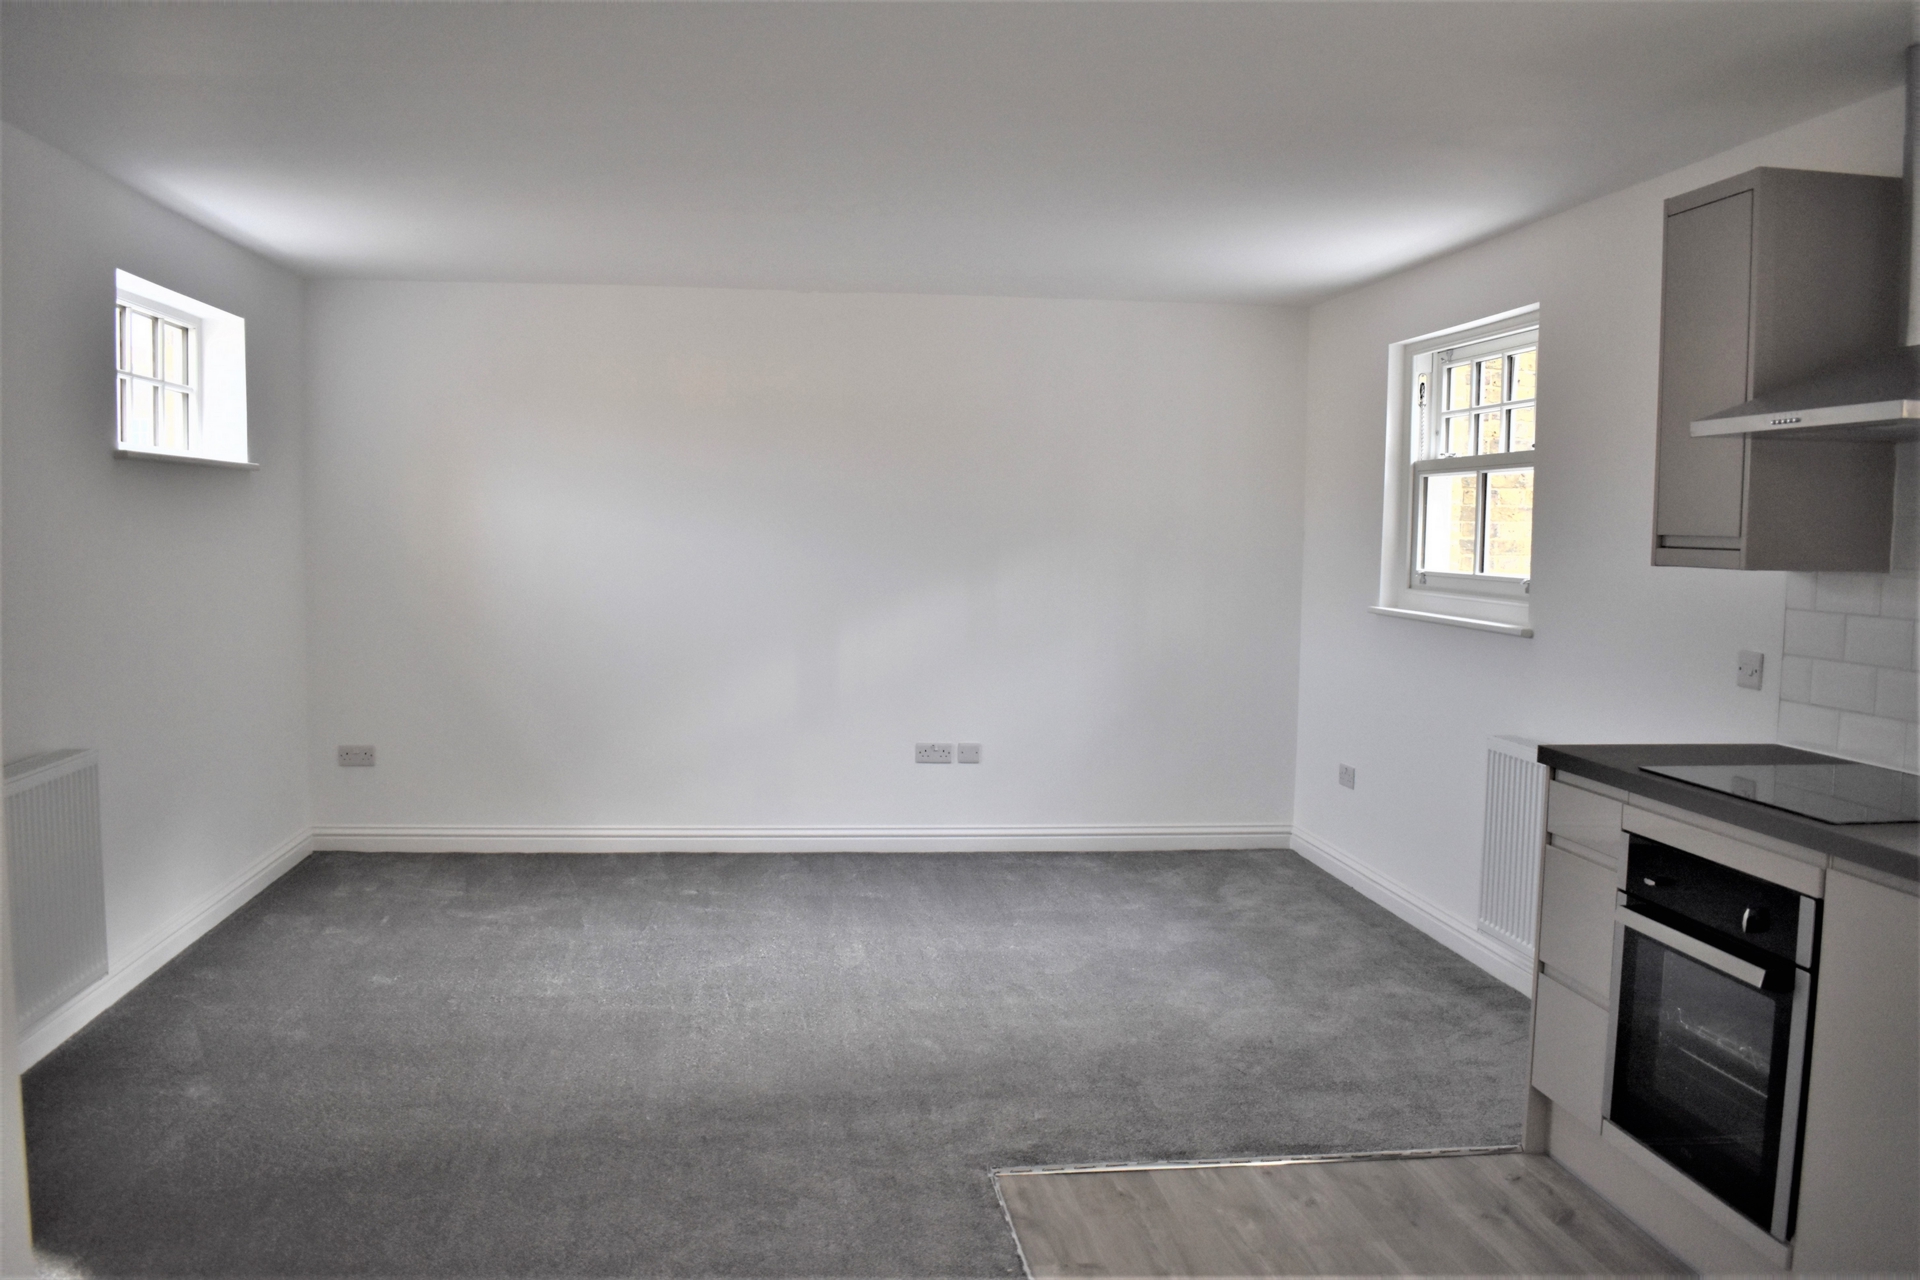 1 bed flat to rent in High Street, Broadstairs, CT10